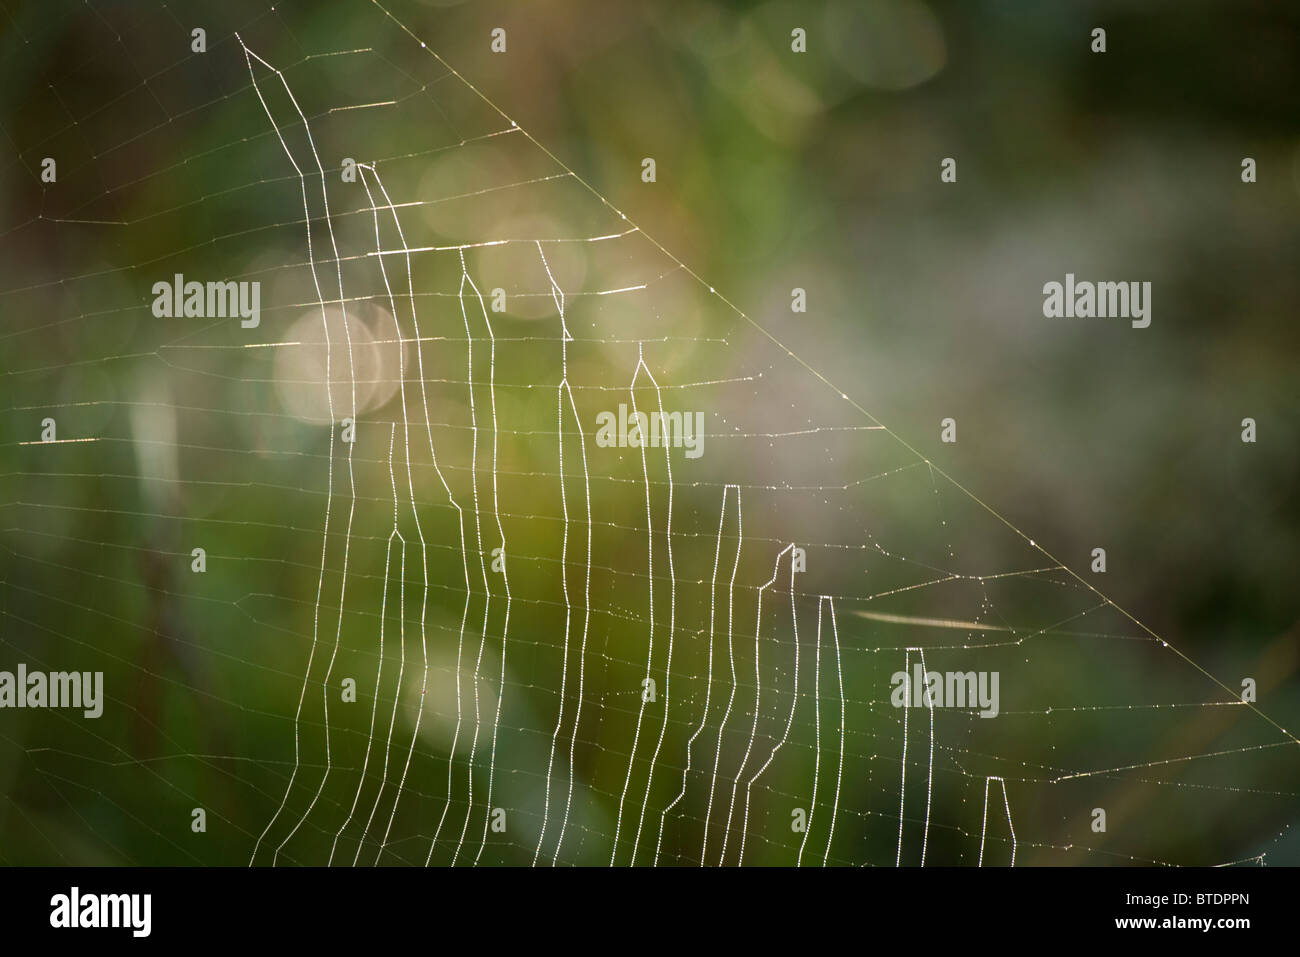 A close up of a Spiders web Stock Photo